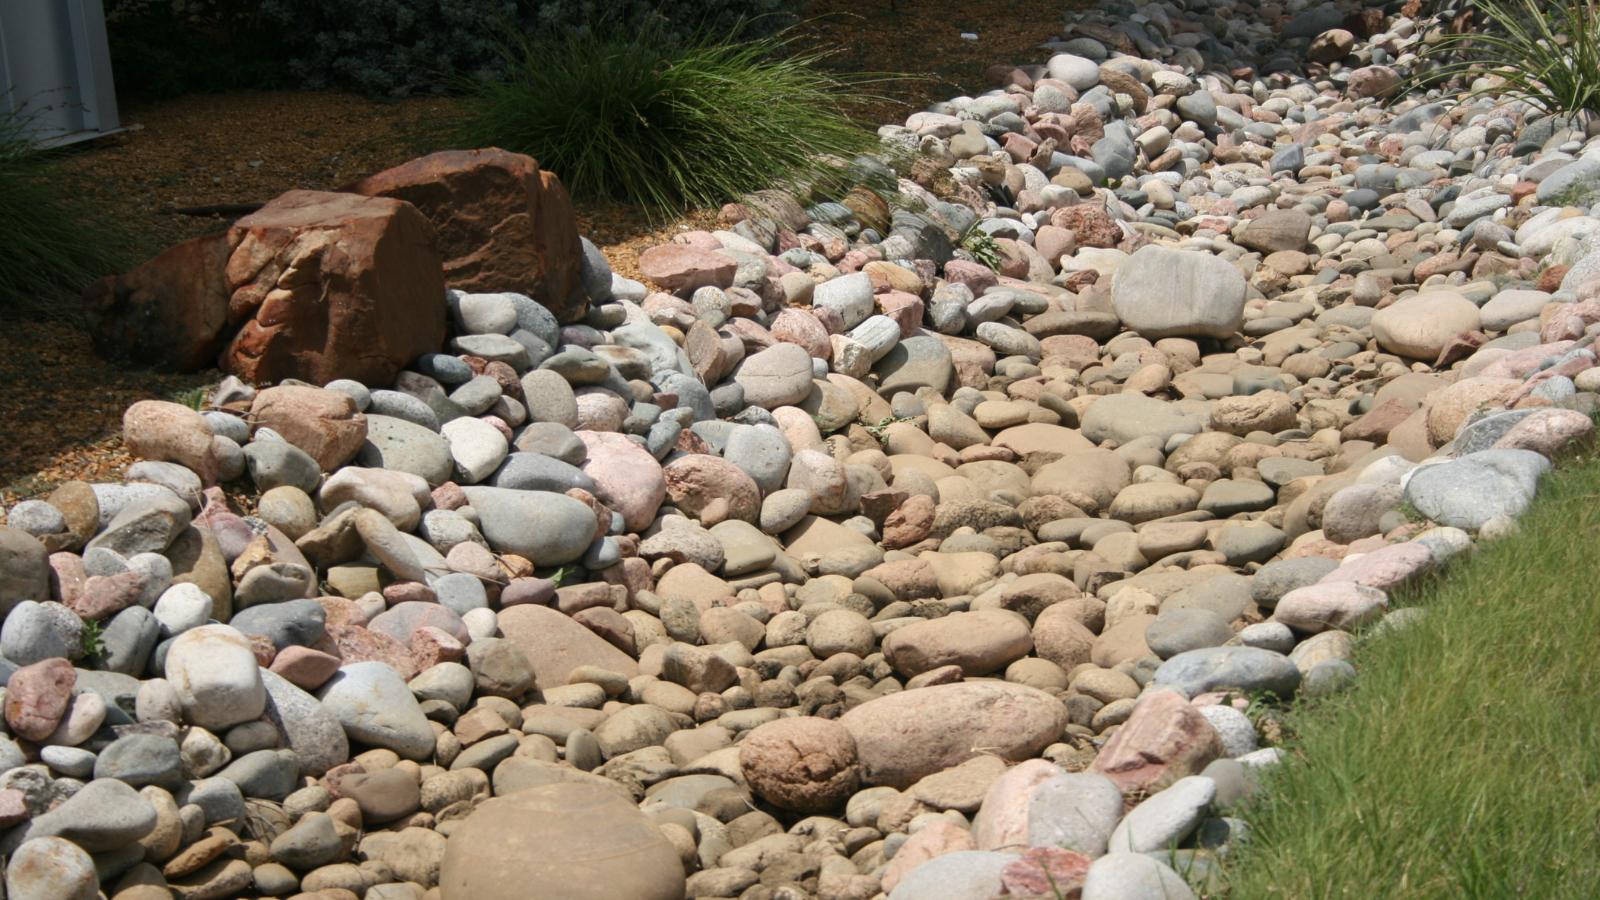 River Rock Is a Great Choice for the Ground Cover in Your Landscape Beds